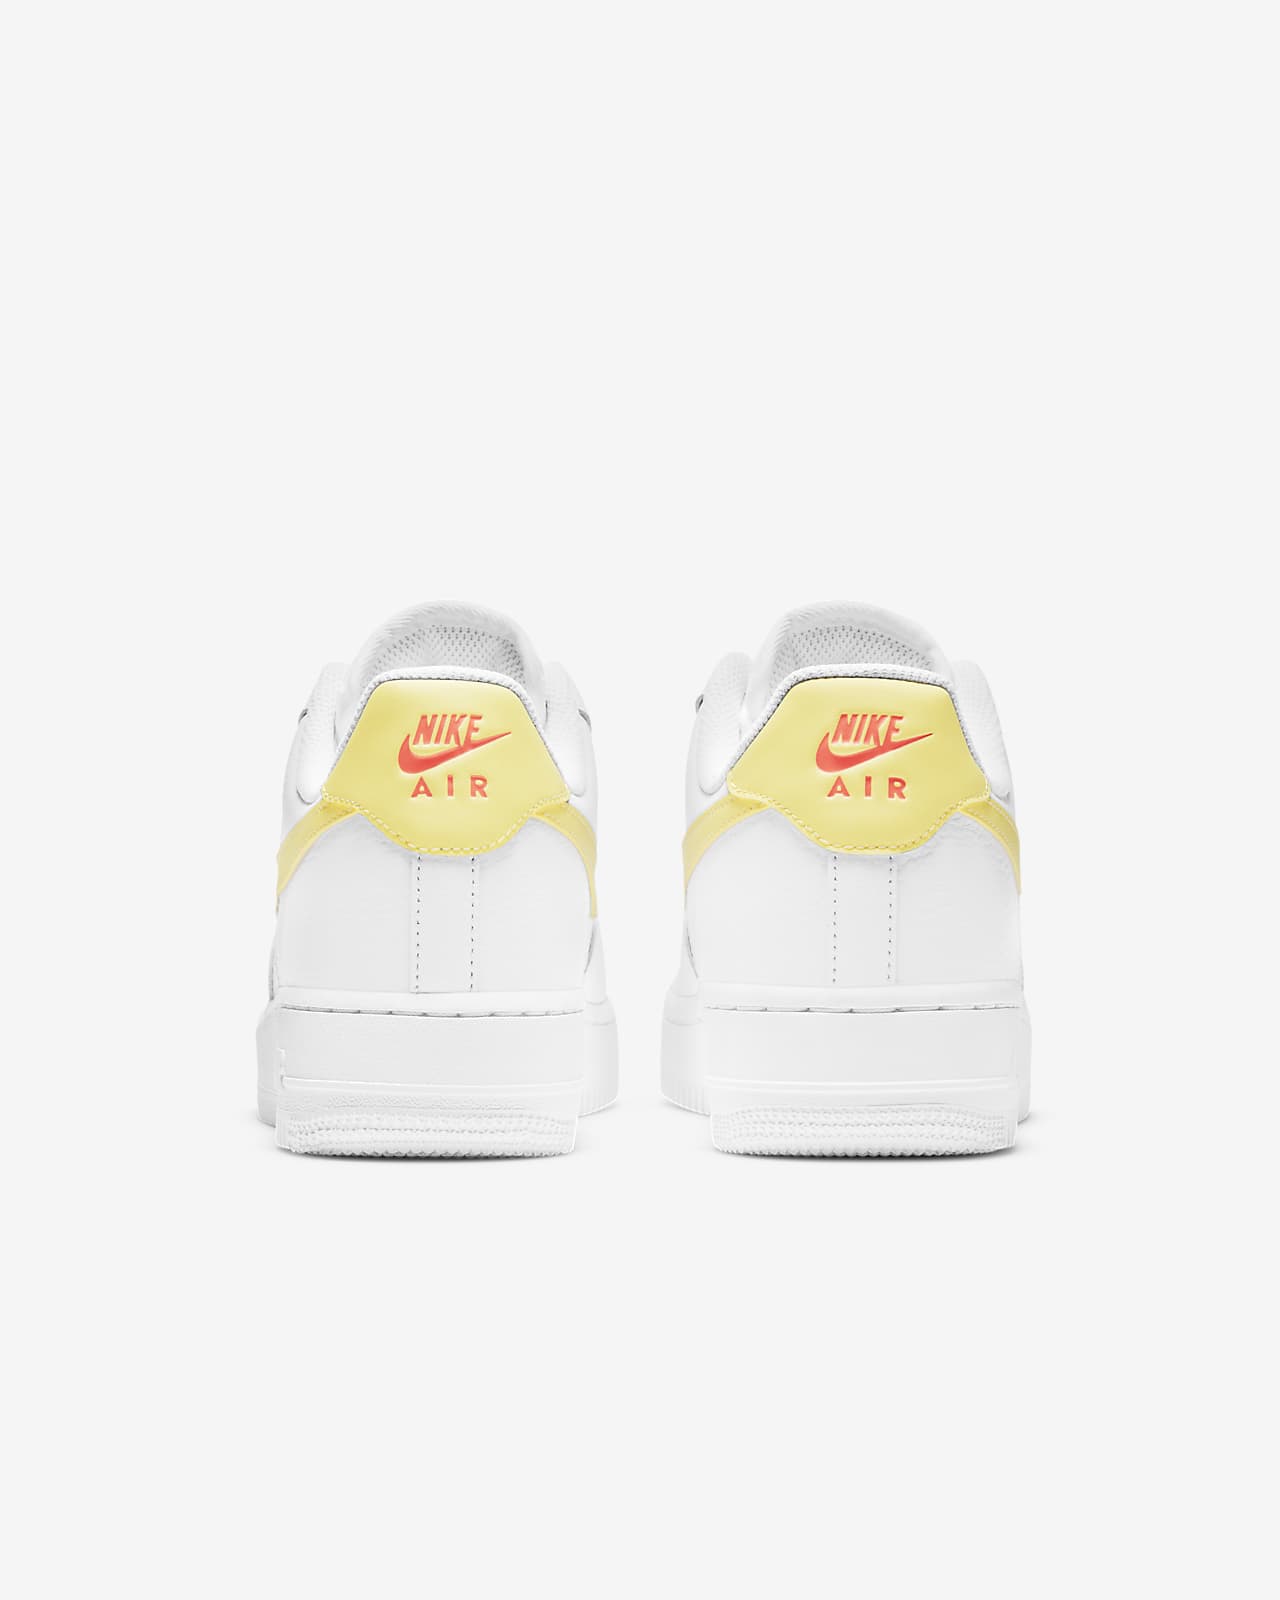 nike air force 1 womens size 6.5 white